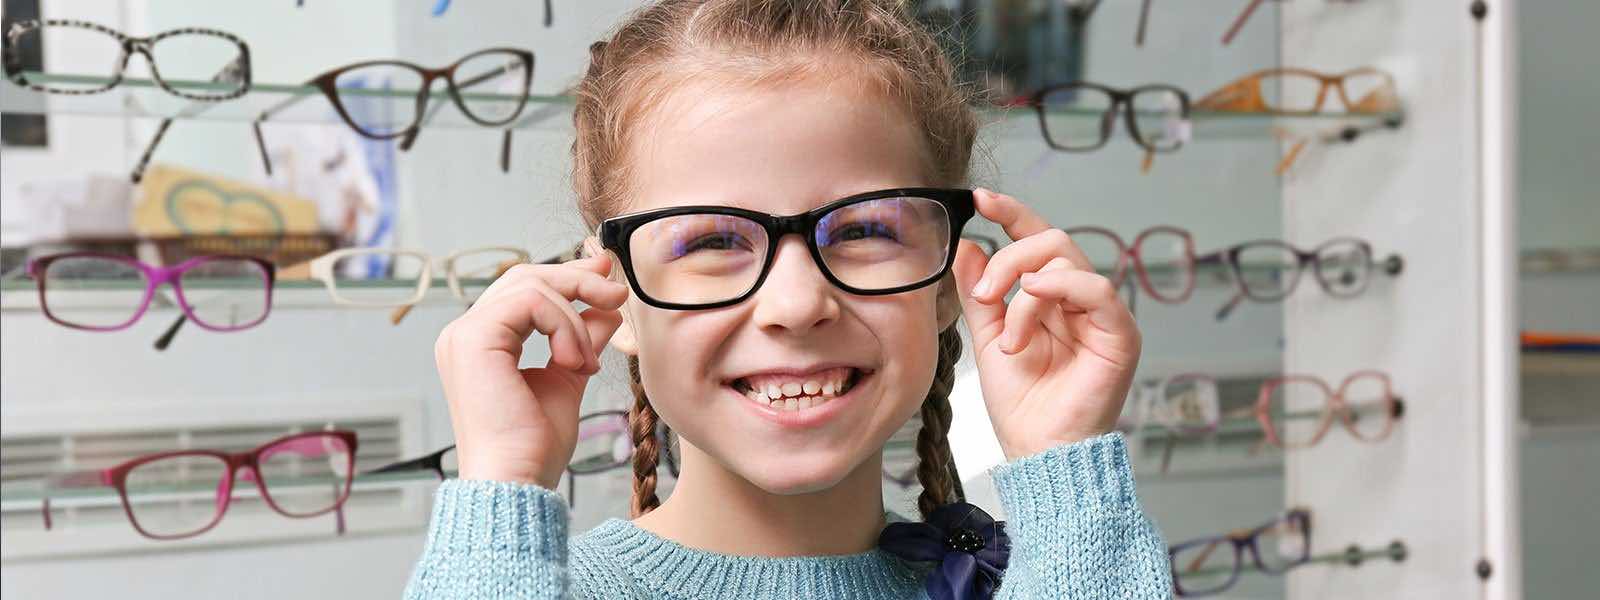 young girl smiling and wearing eyeglasses after an eye exam at an optical shop